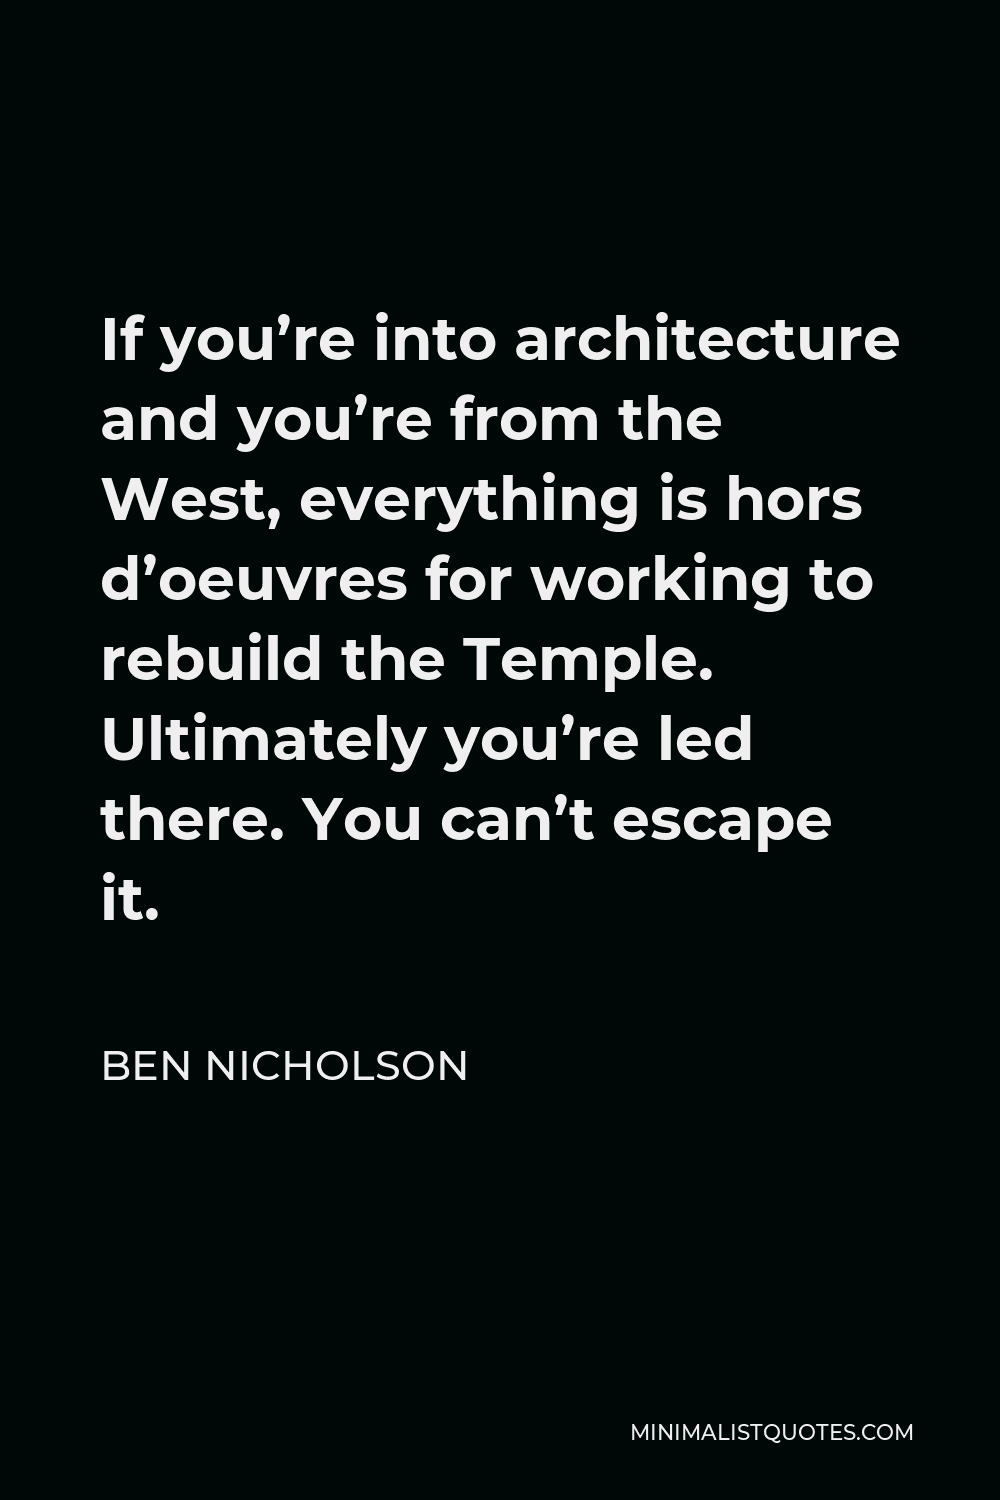 Ben Nicholson Quote - If you’re into architecture and you’re from the West, everything is hors d’oeuvres for working to rebuild the Temple. Ultimately you’re led there. You can’t escape it.